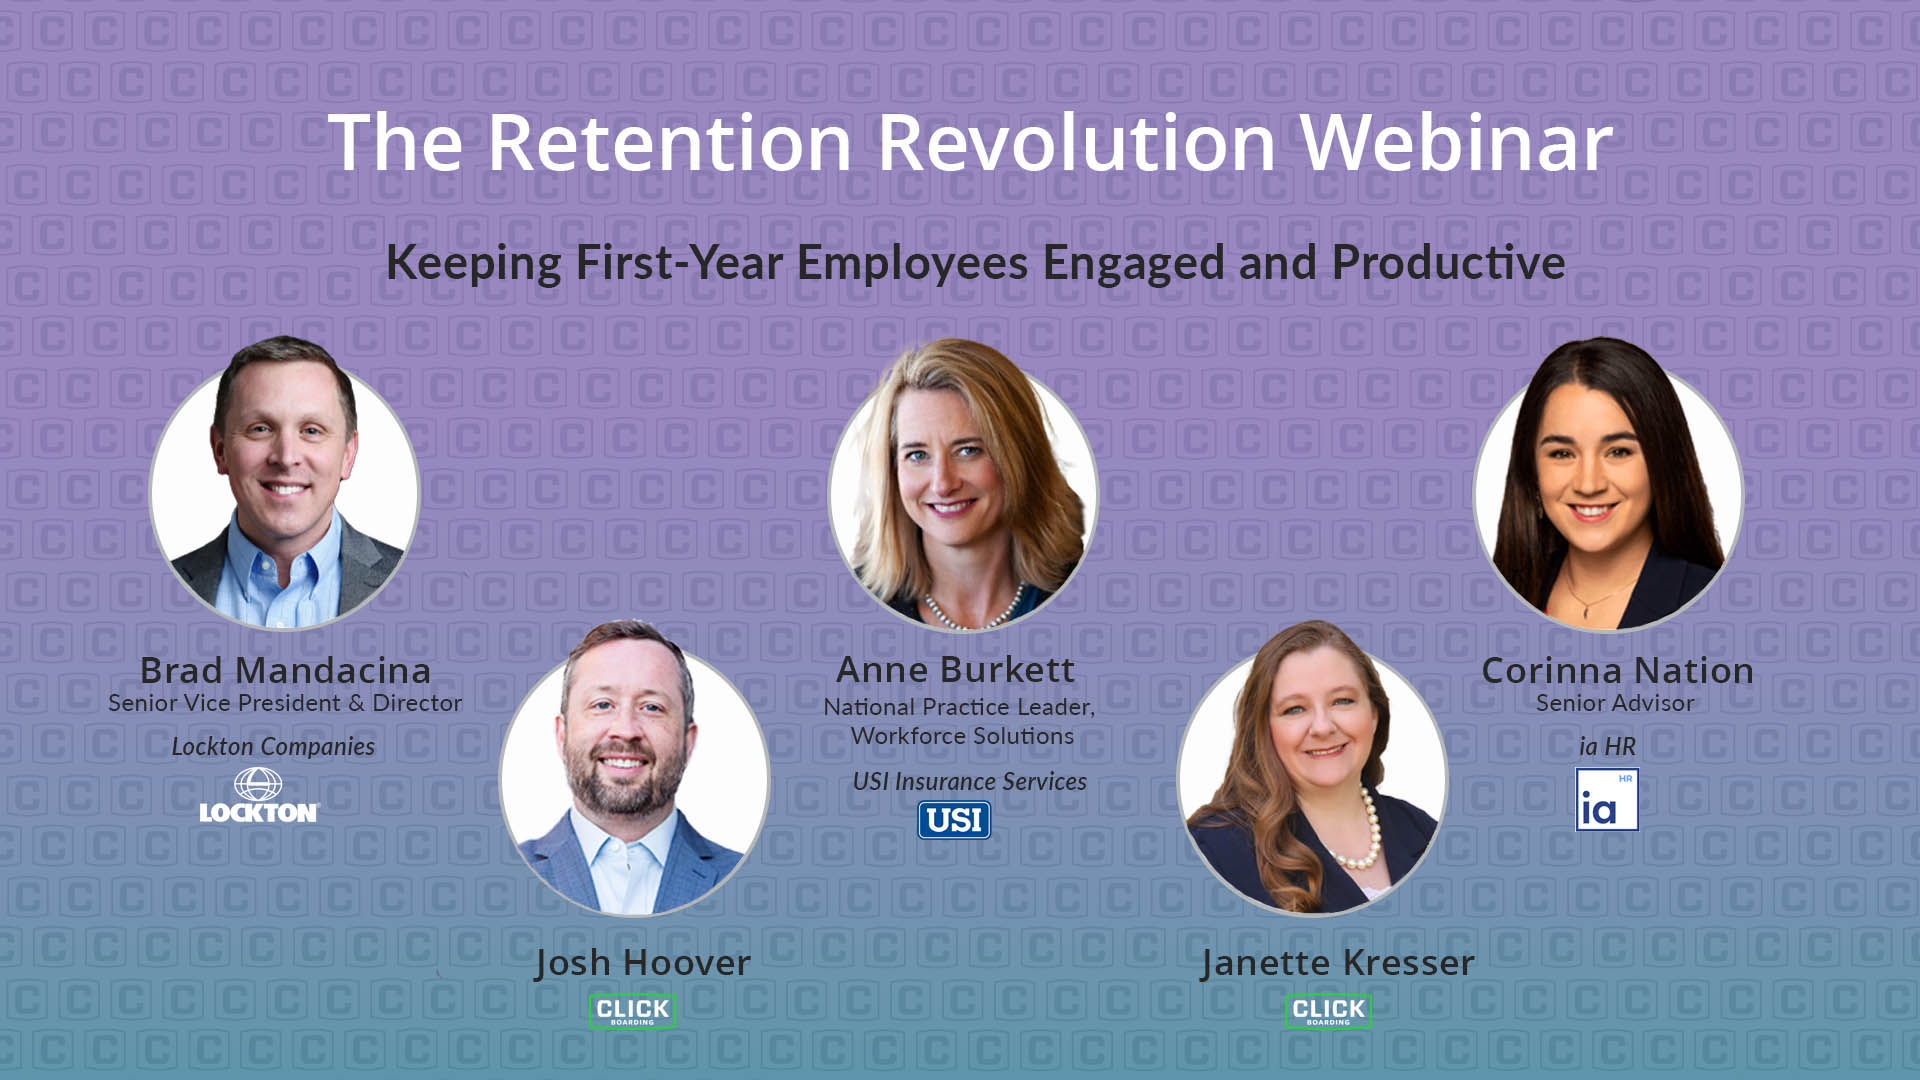 The Retention Revolution: Leveraging Employee Feedback and Onboarding to Keep First-Year Employees Engaged and Productive Webinar